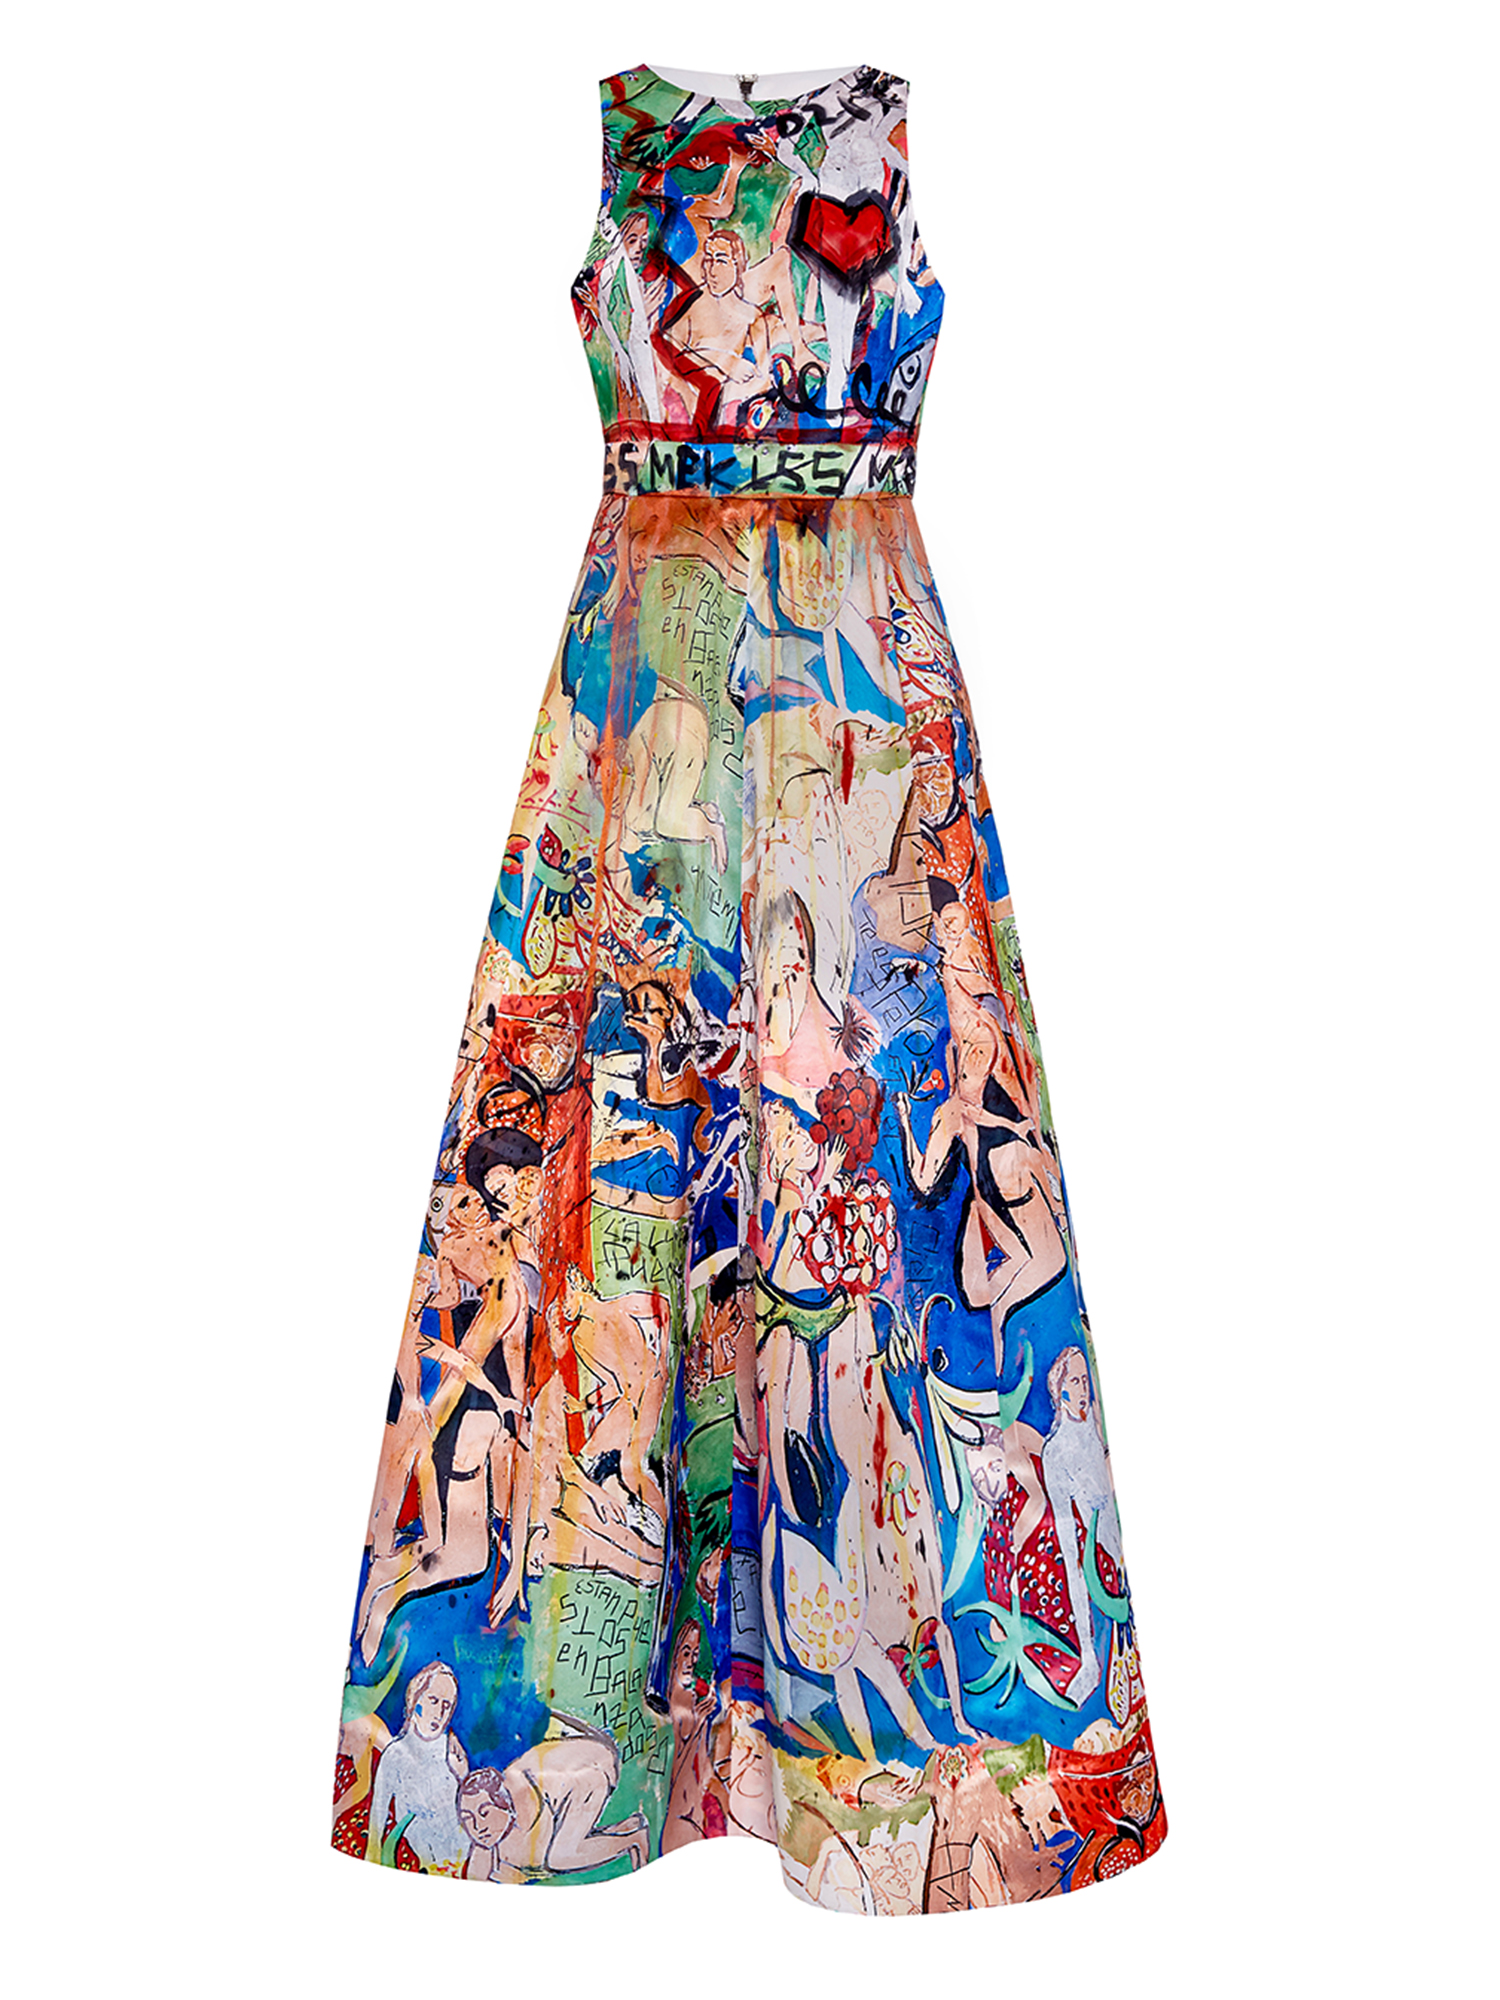   DOMINGO ZAPATA&nbsp;-&nbsp;  alice + olivia Gown Hand-Painted By Domingo Zapata , 2015   